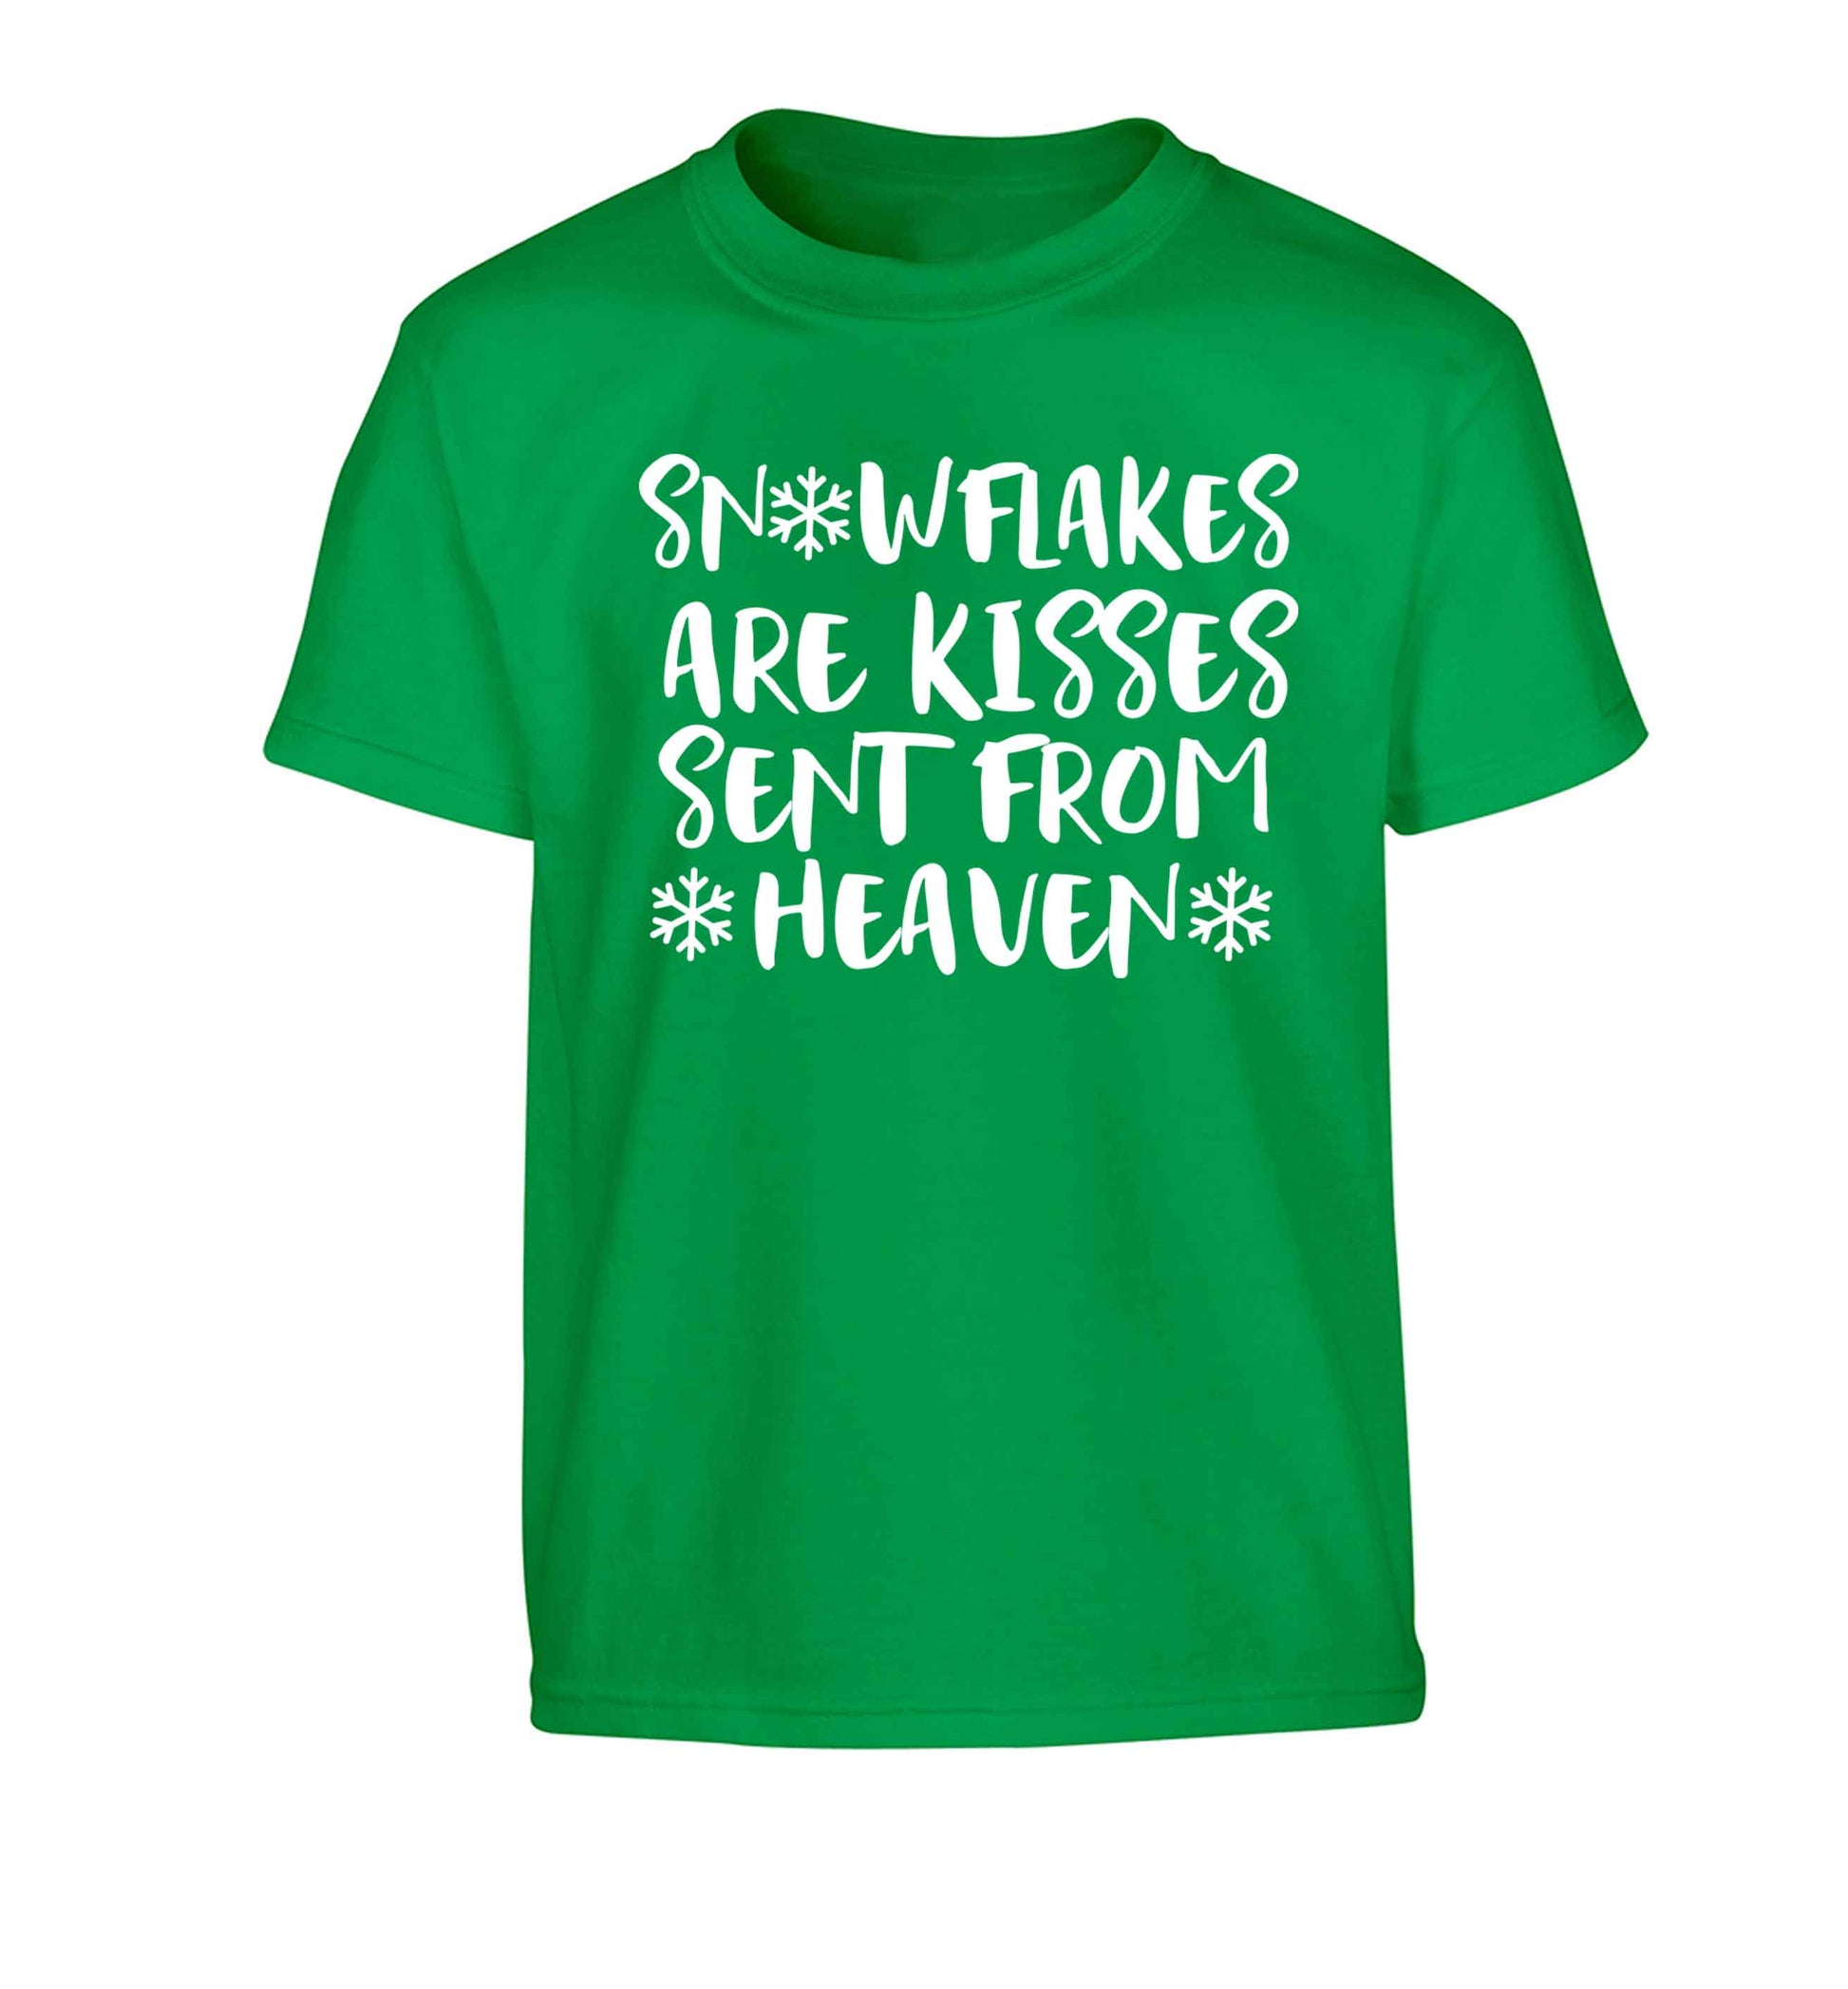 Snowflakes are kisses sent from heaven Children's green Tshirt 12-13 Years